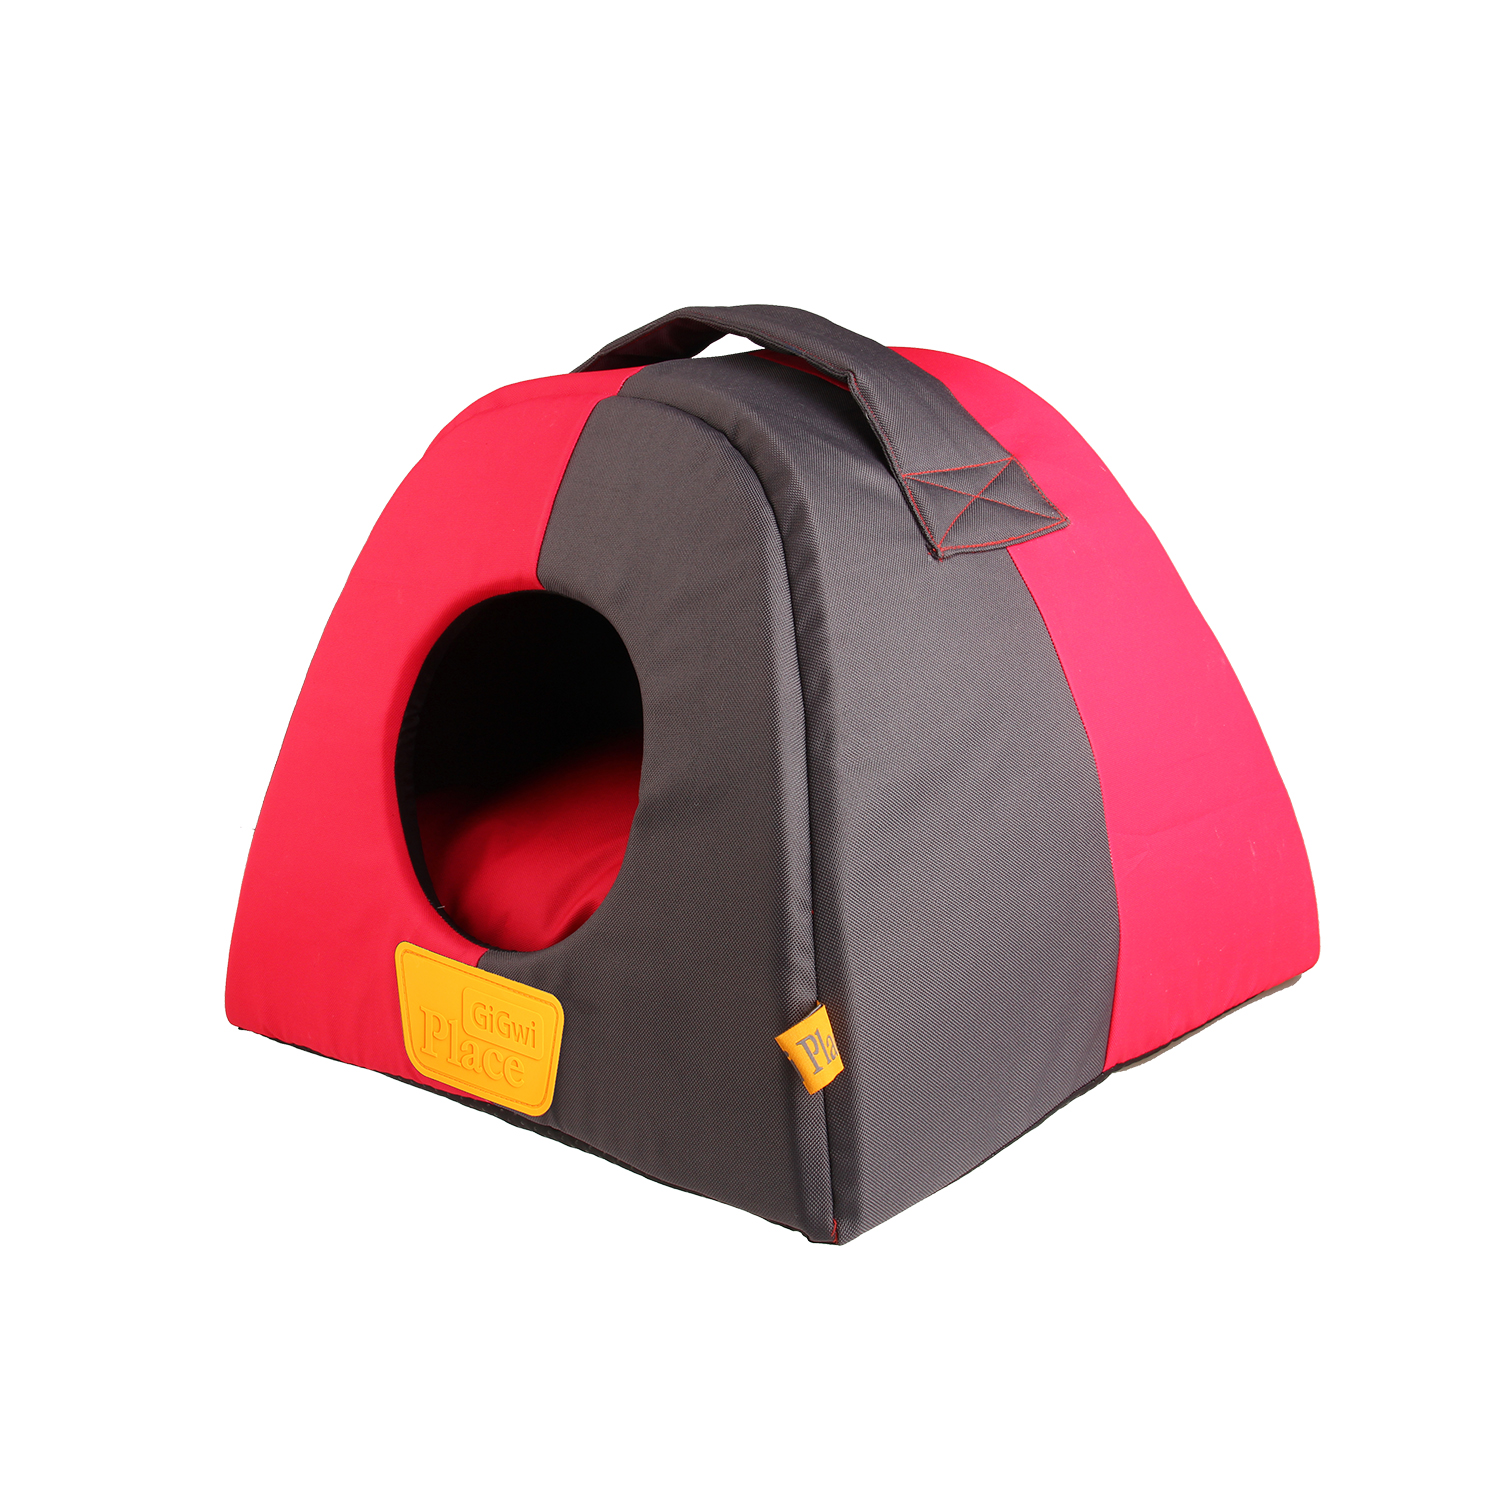 GiG Place Cubby Pet House Durable Oxford Fabric Breathable Waterproof Pet Bed